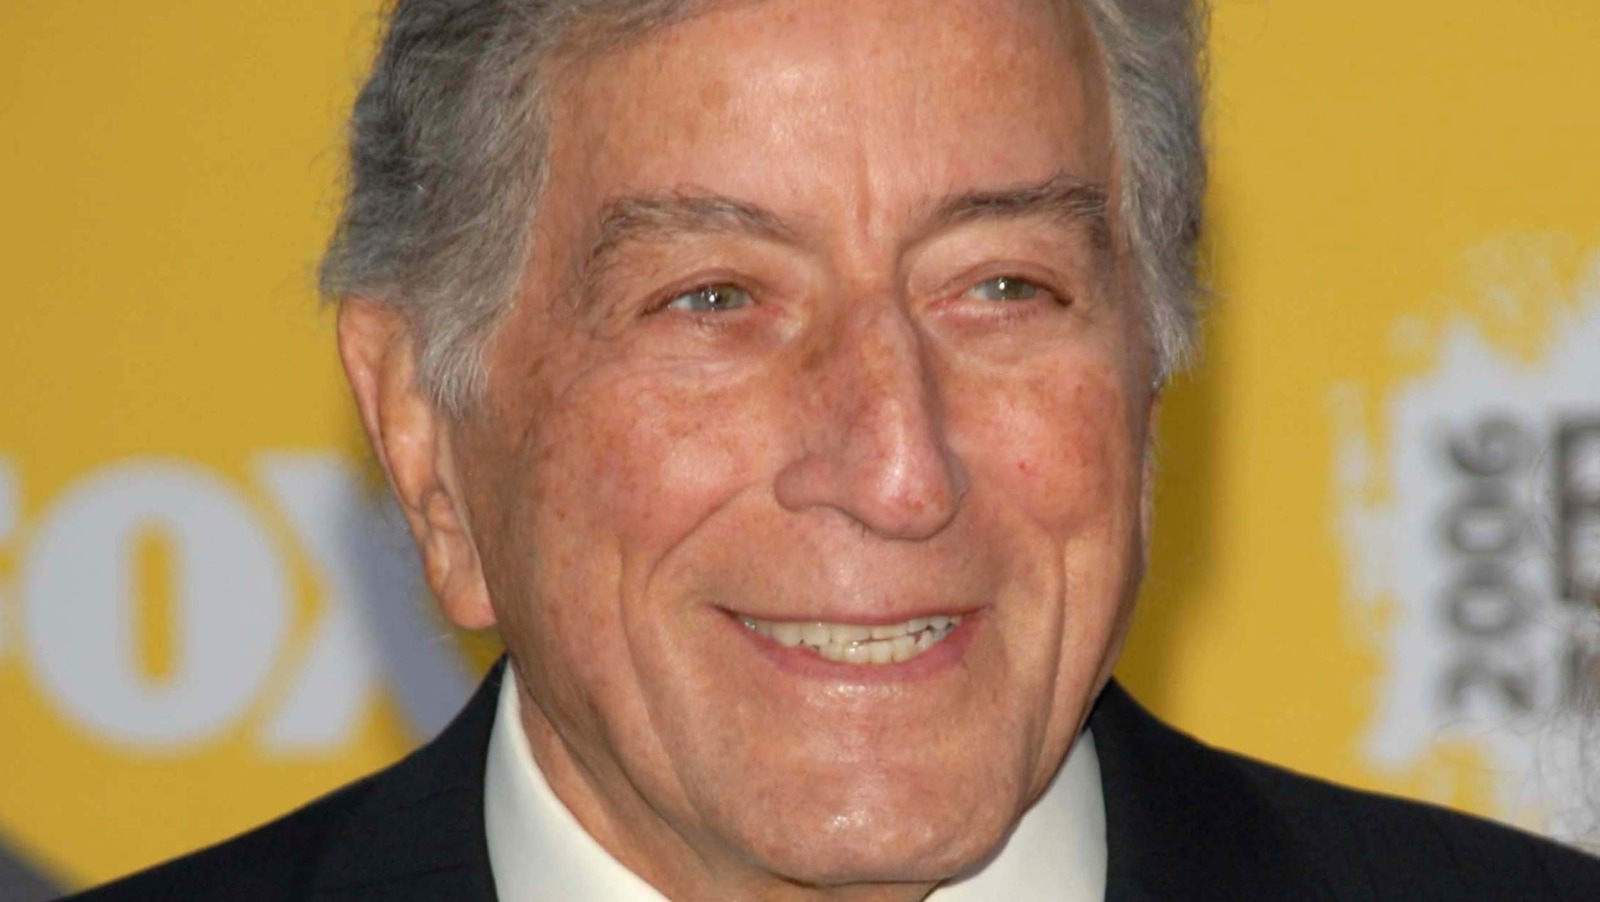 Where Does Tony Bennett Live And How Big Is His House?